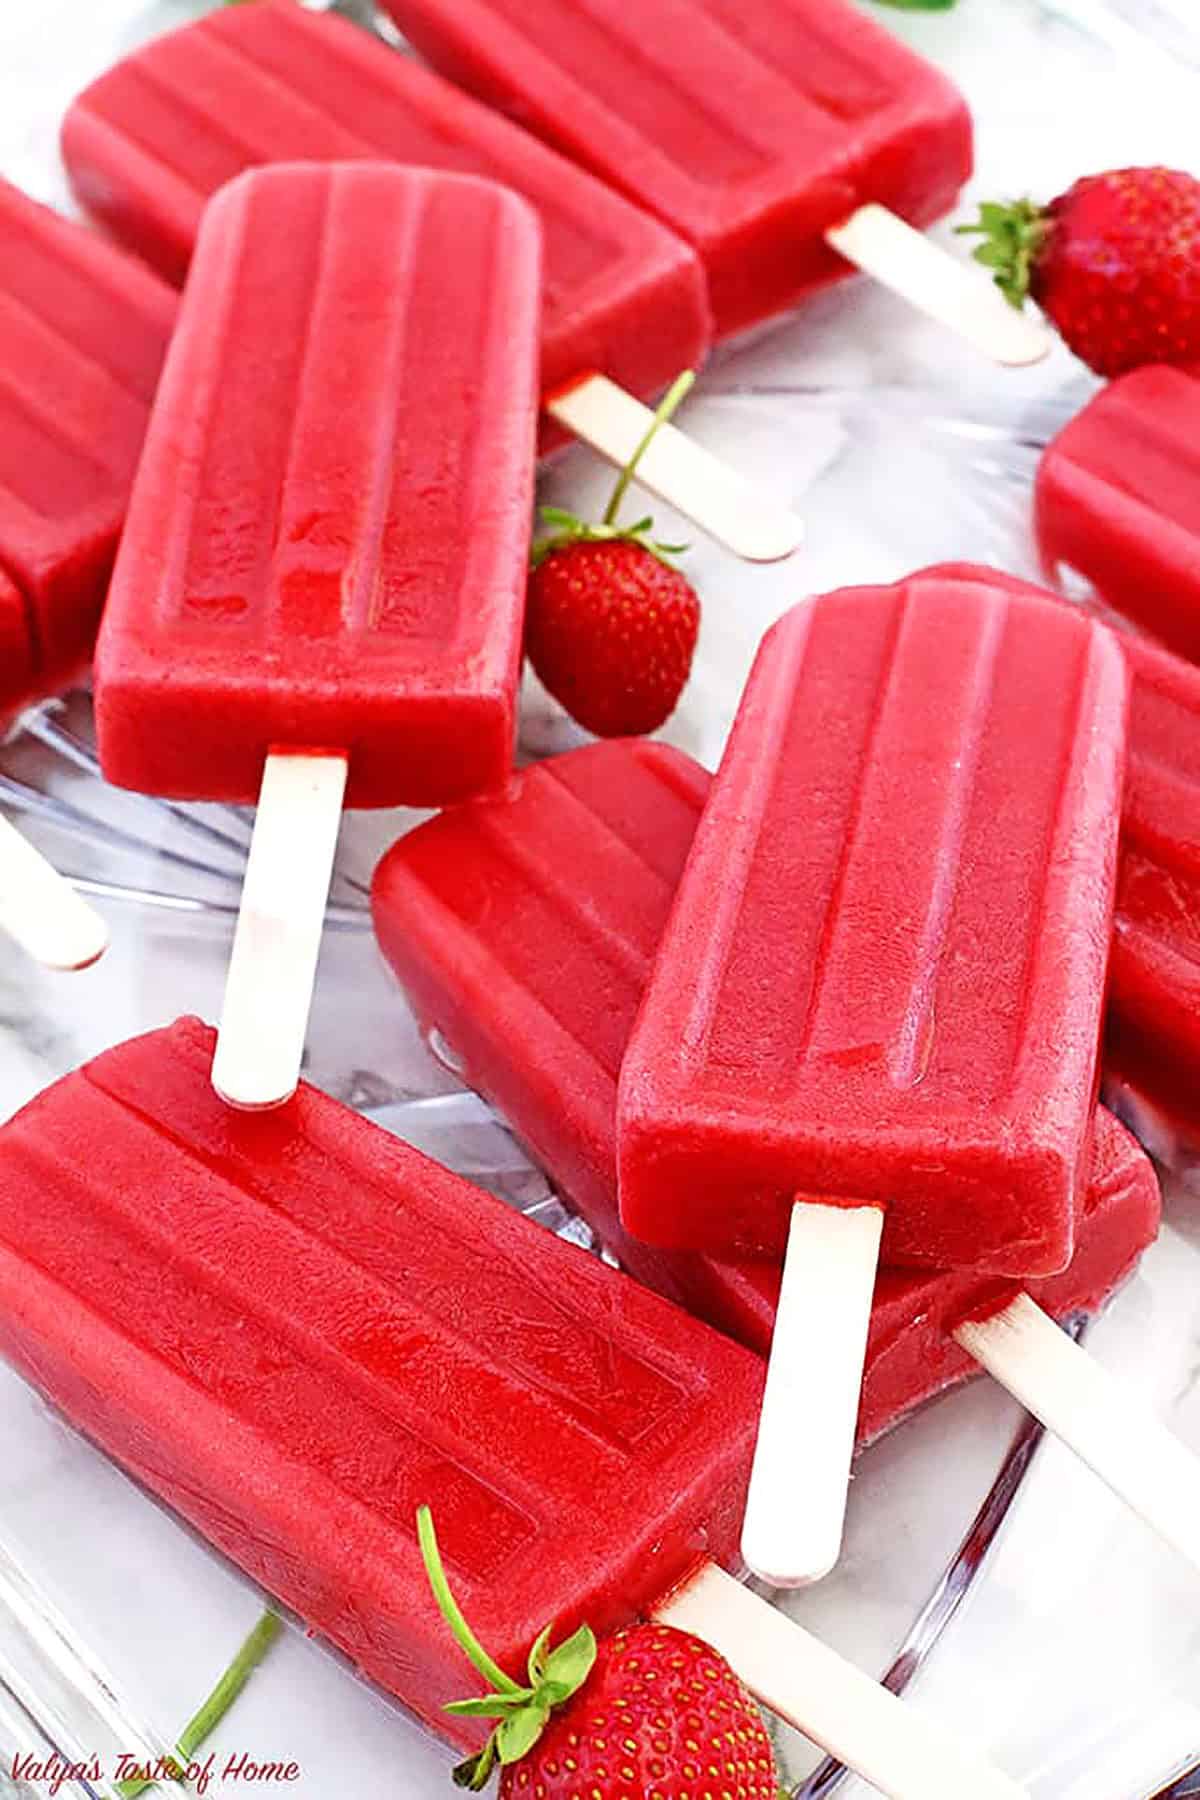 If you love popsicles, I have the perfect recipe for you! These homemade Strawberries Popsicles are naturally sweet, free of any refined sugar, and loaded with a delicious fresh strawberry flavor in each bite!